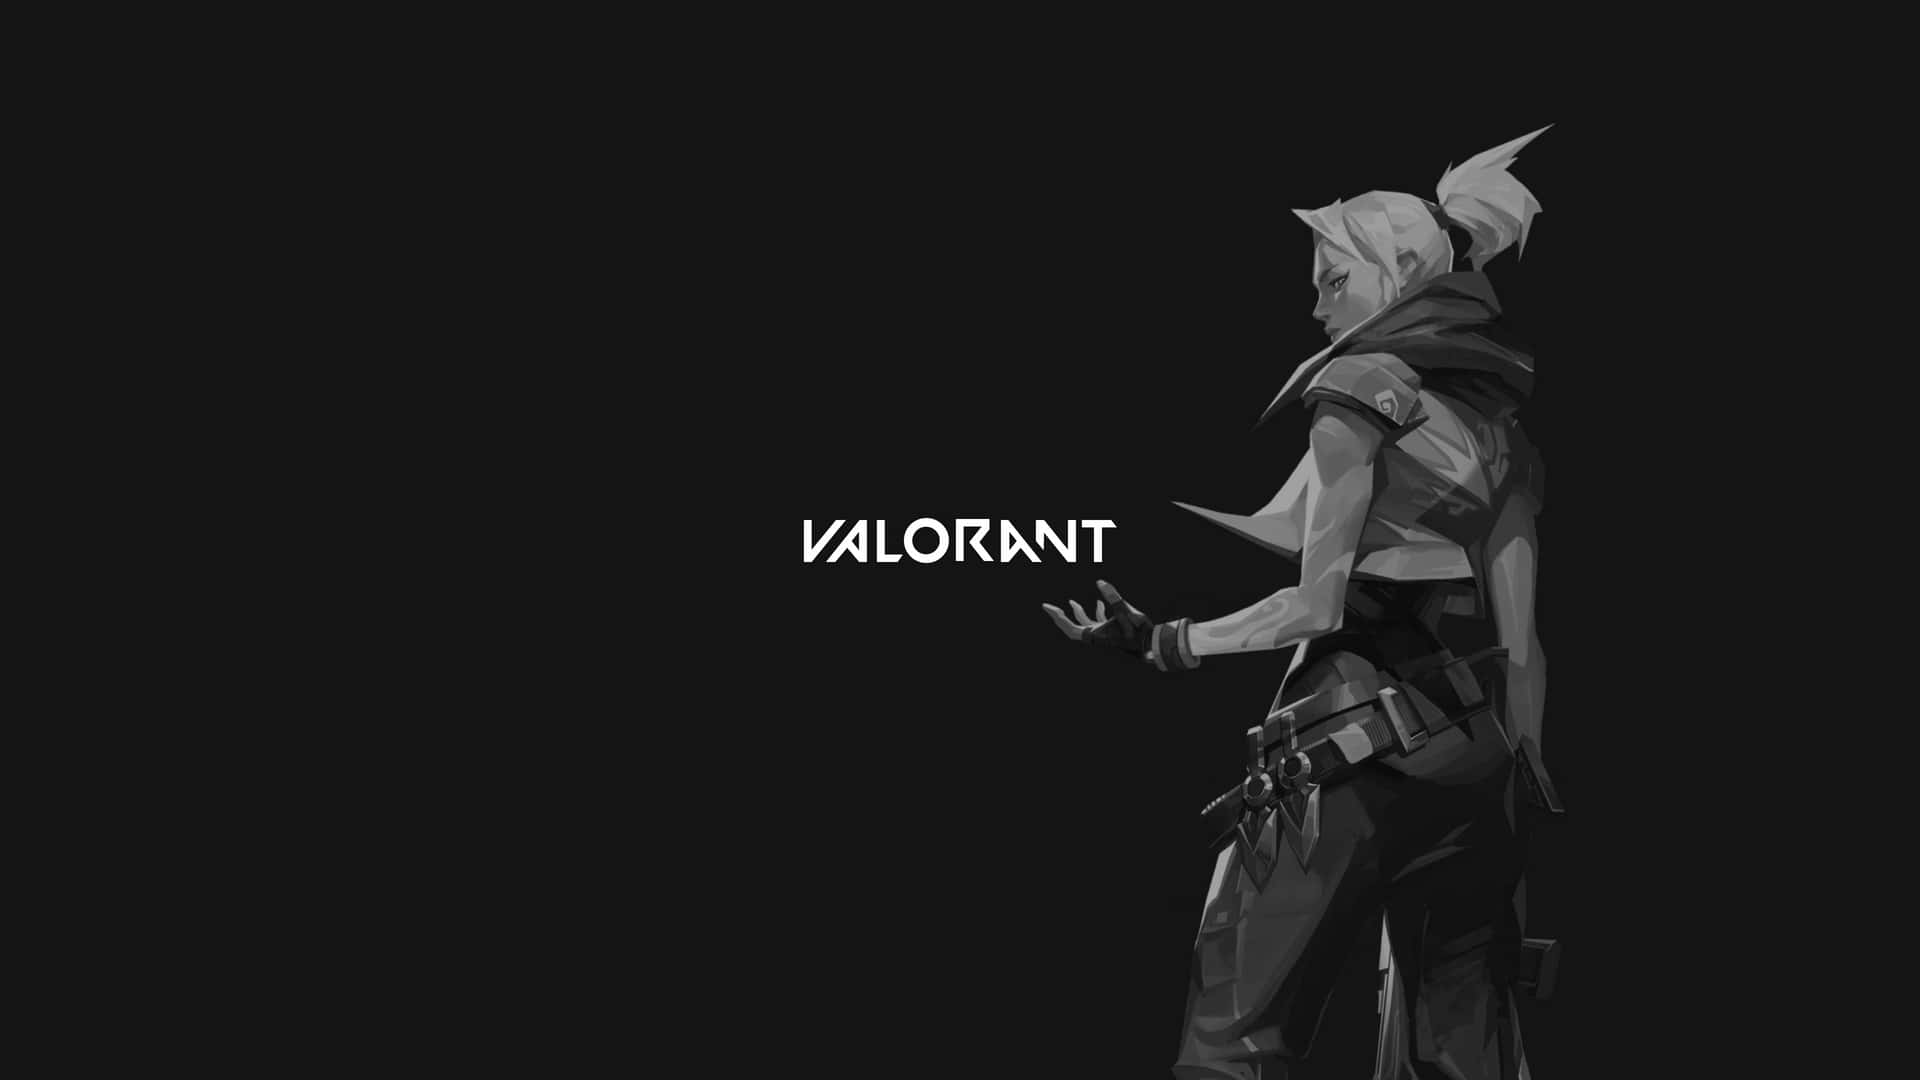 Take your competitive gaming to the next level with Valorant